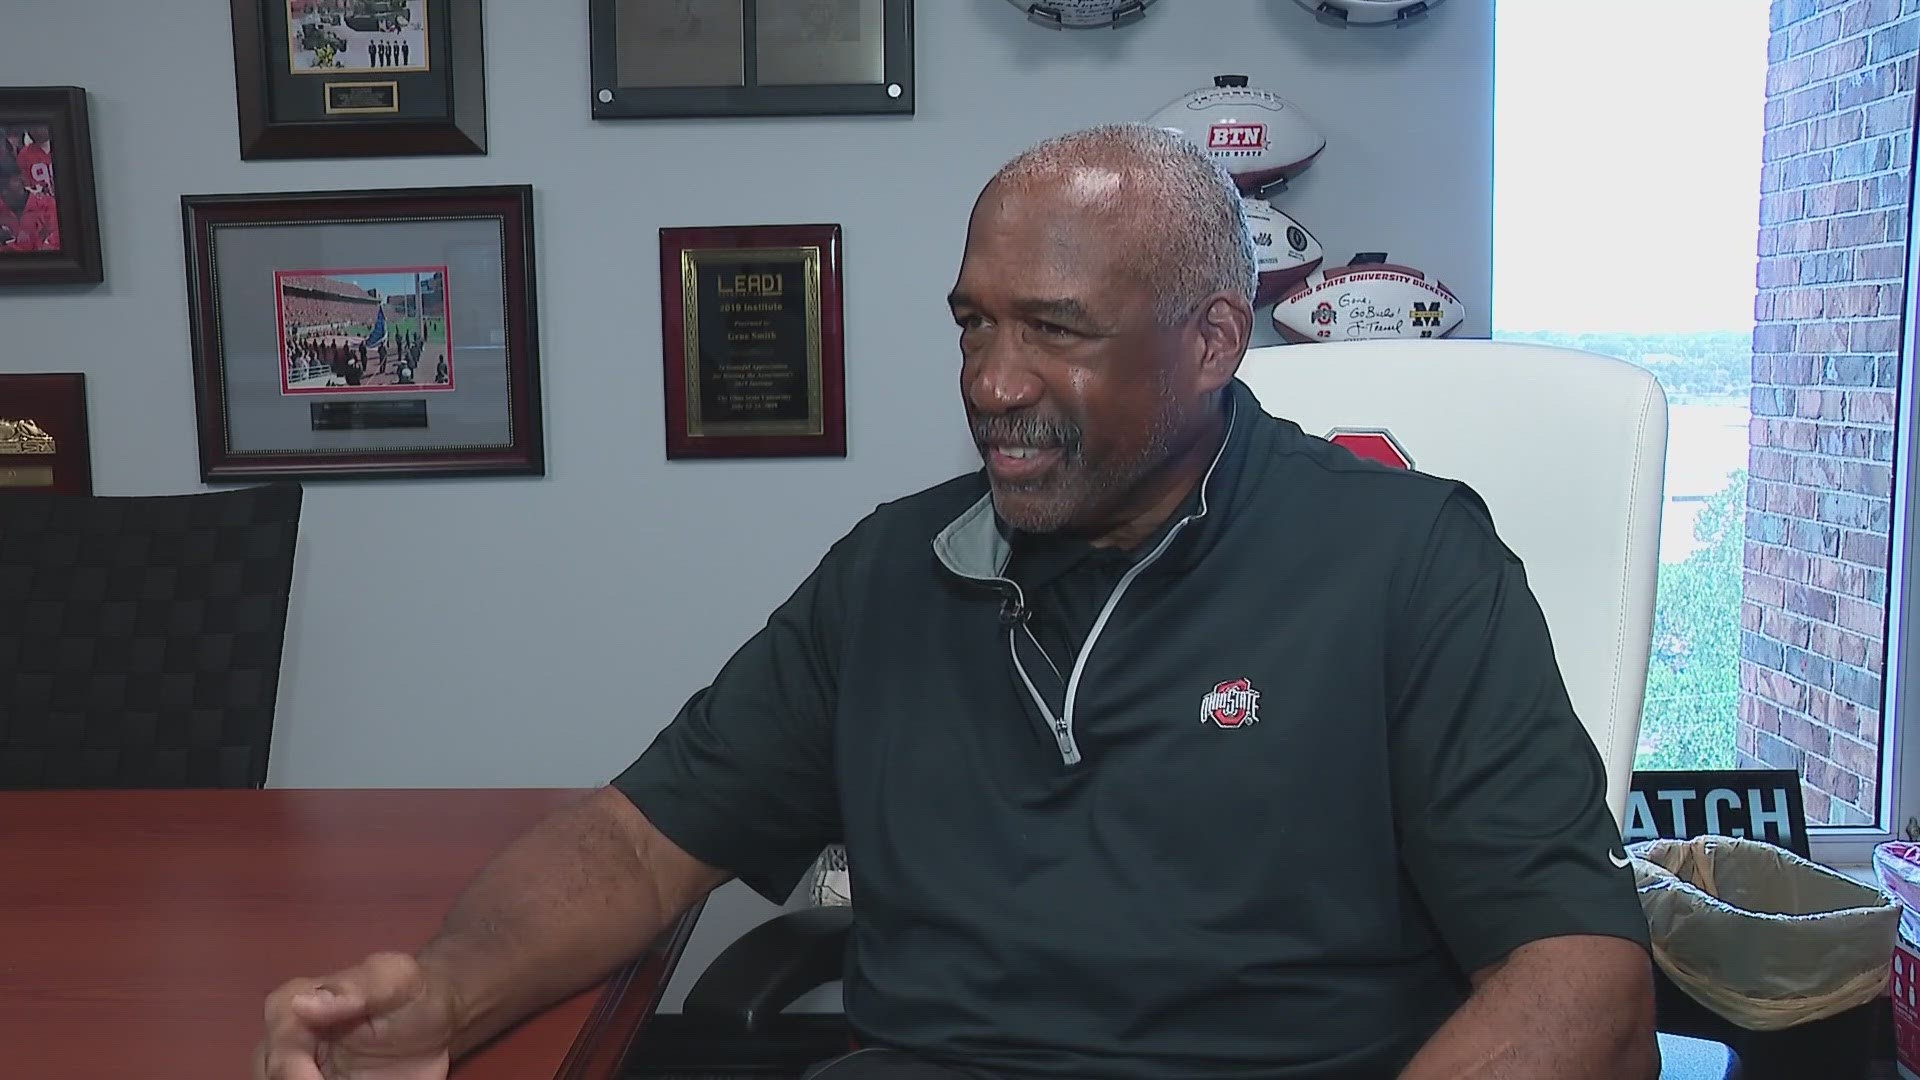 Angela An spoke with Gene Smith about why he chose now to retire given the excitement around the Big Ten expansion.